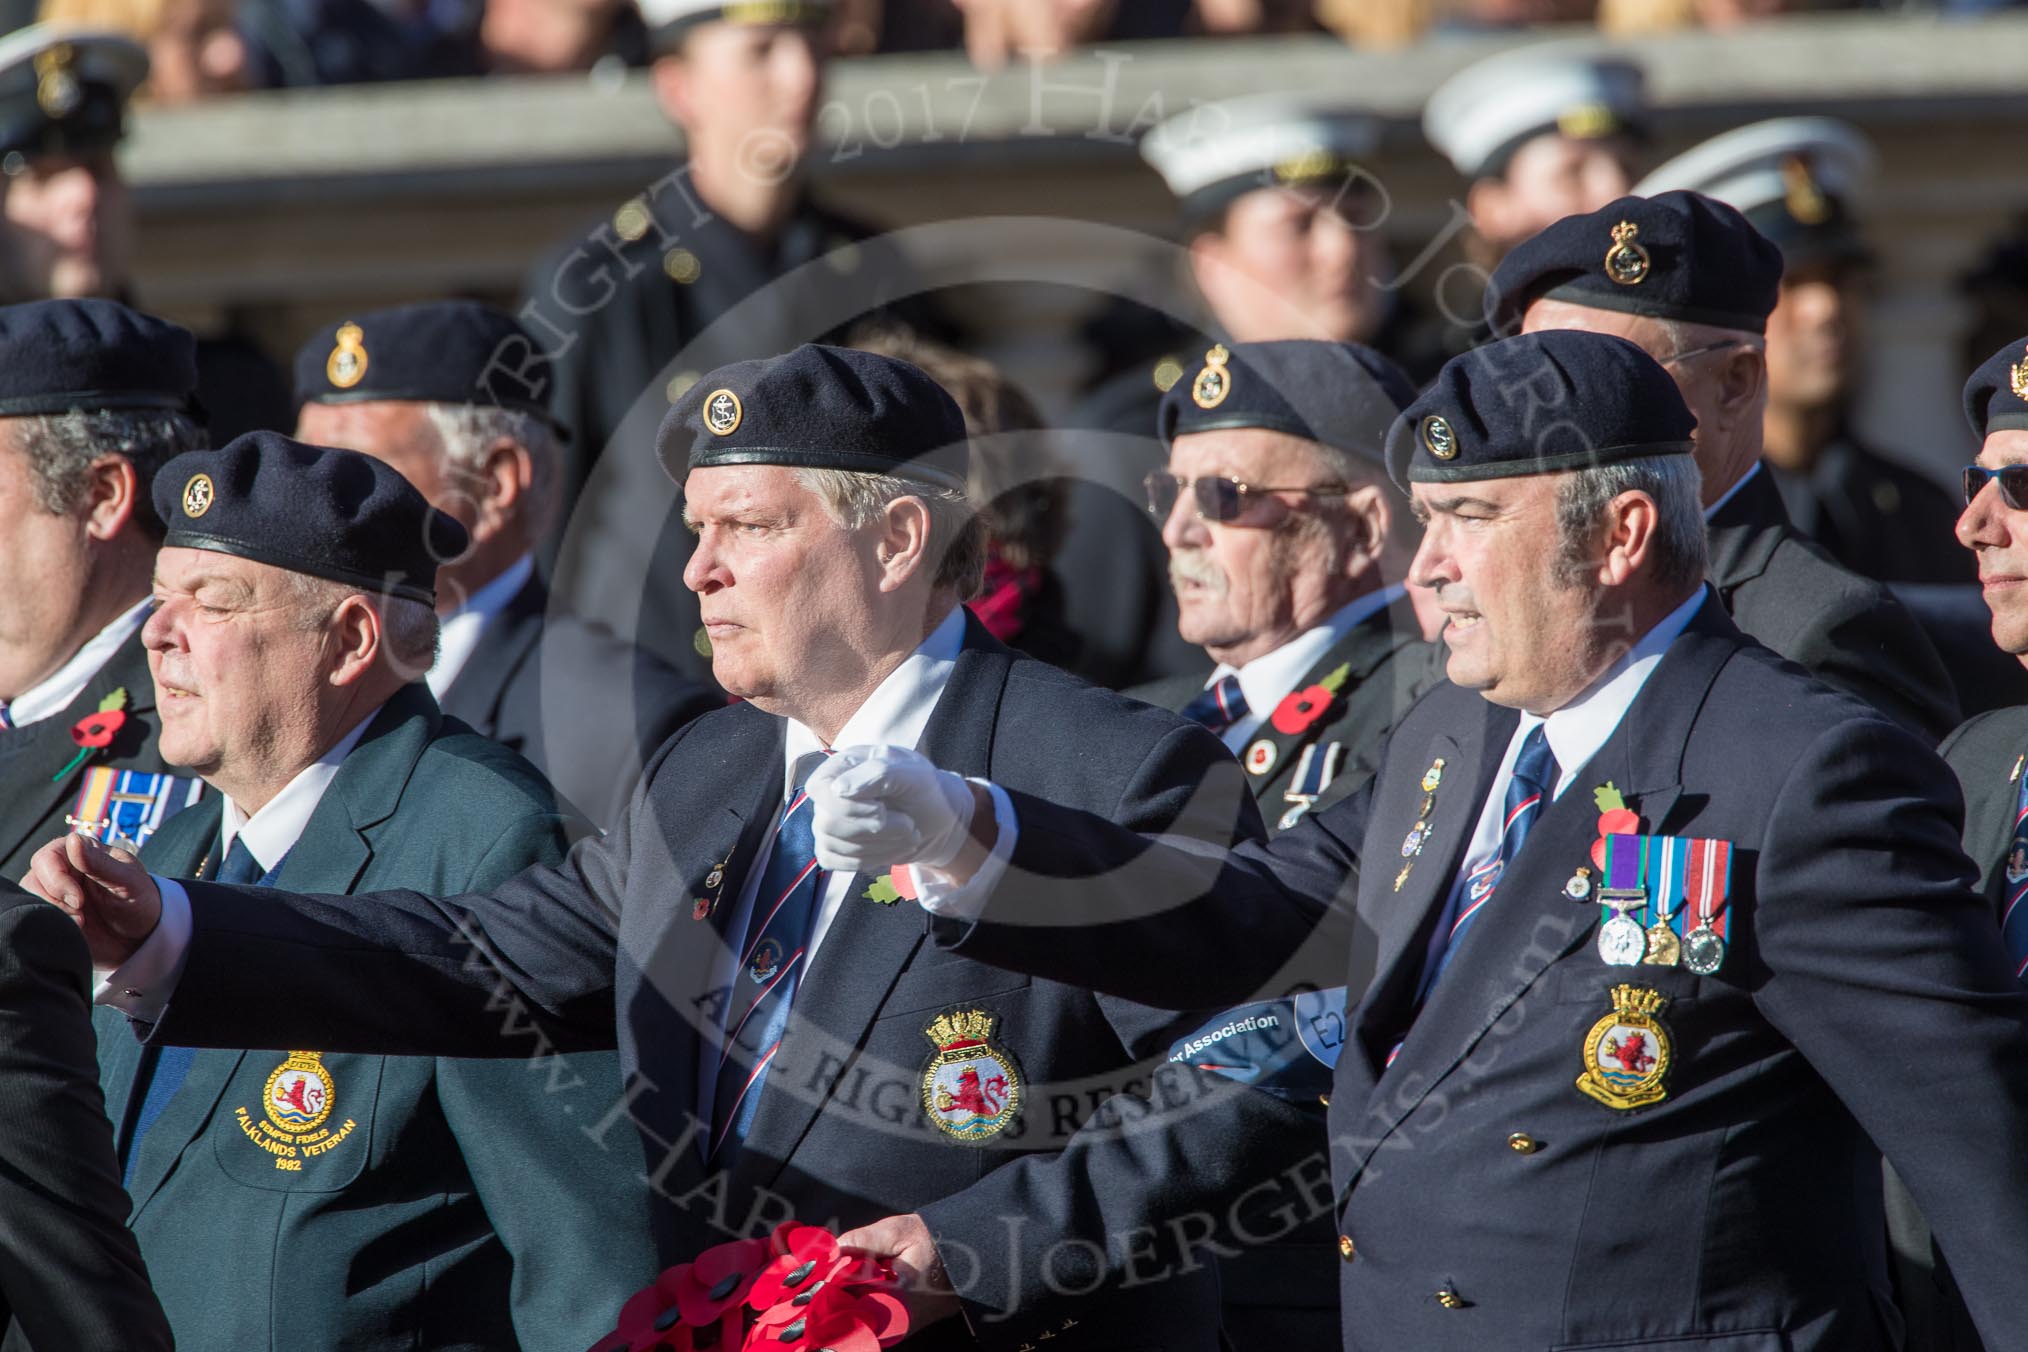 HMS Exeter Association  (Group E28, 25 members) during the Royal British Legion March Past on Remembrance Sunday at the Cenotaph, Whitehall, Westminster, London, 11 November 2018, 11:44.